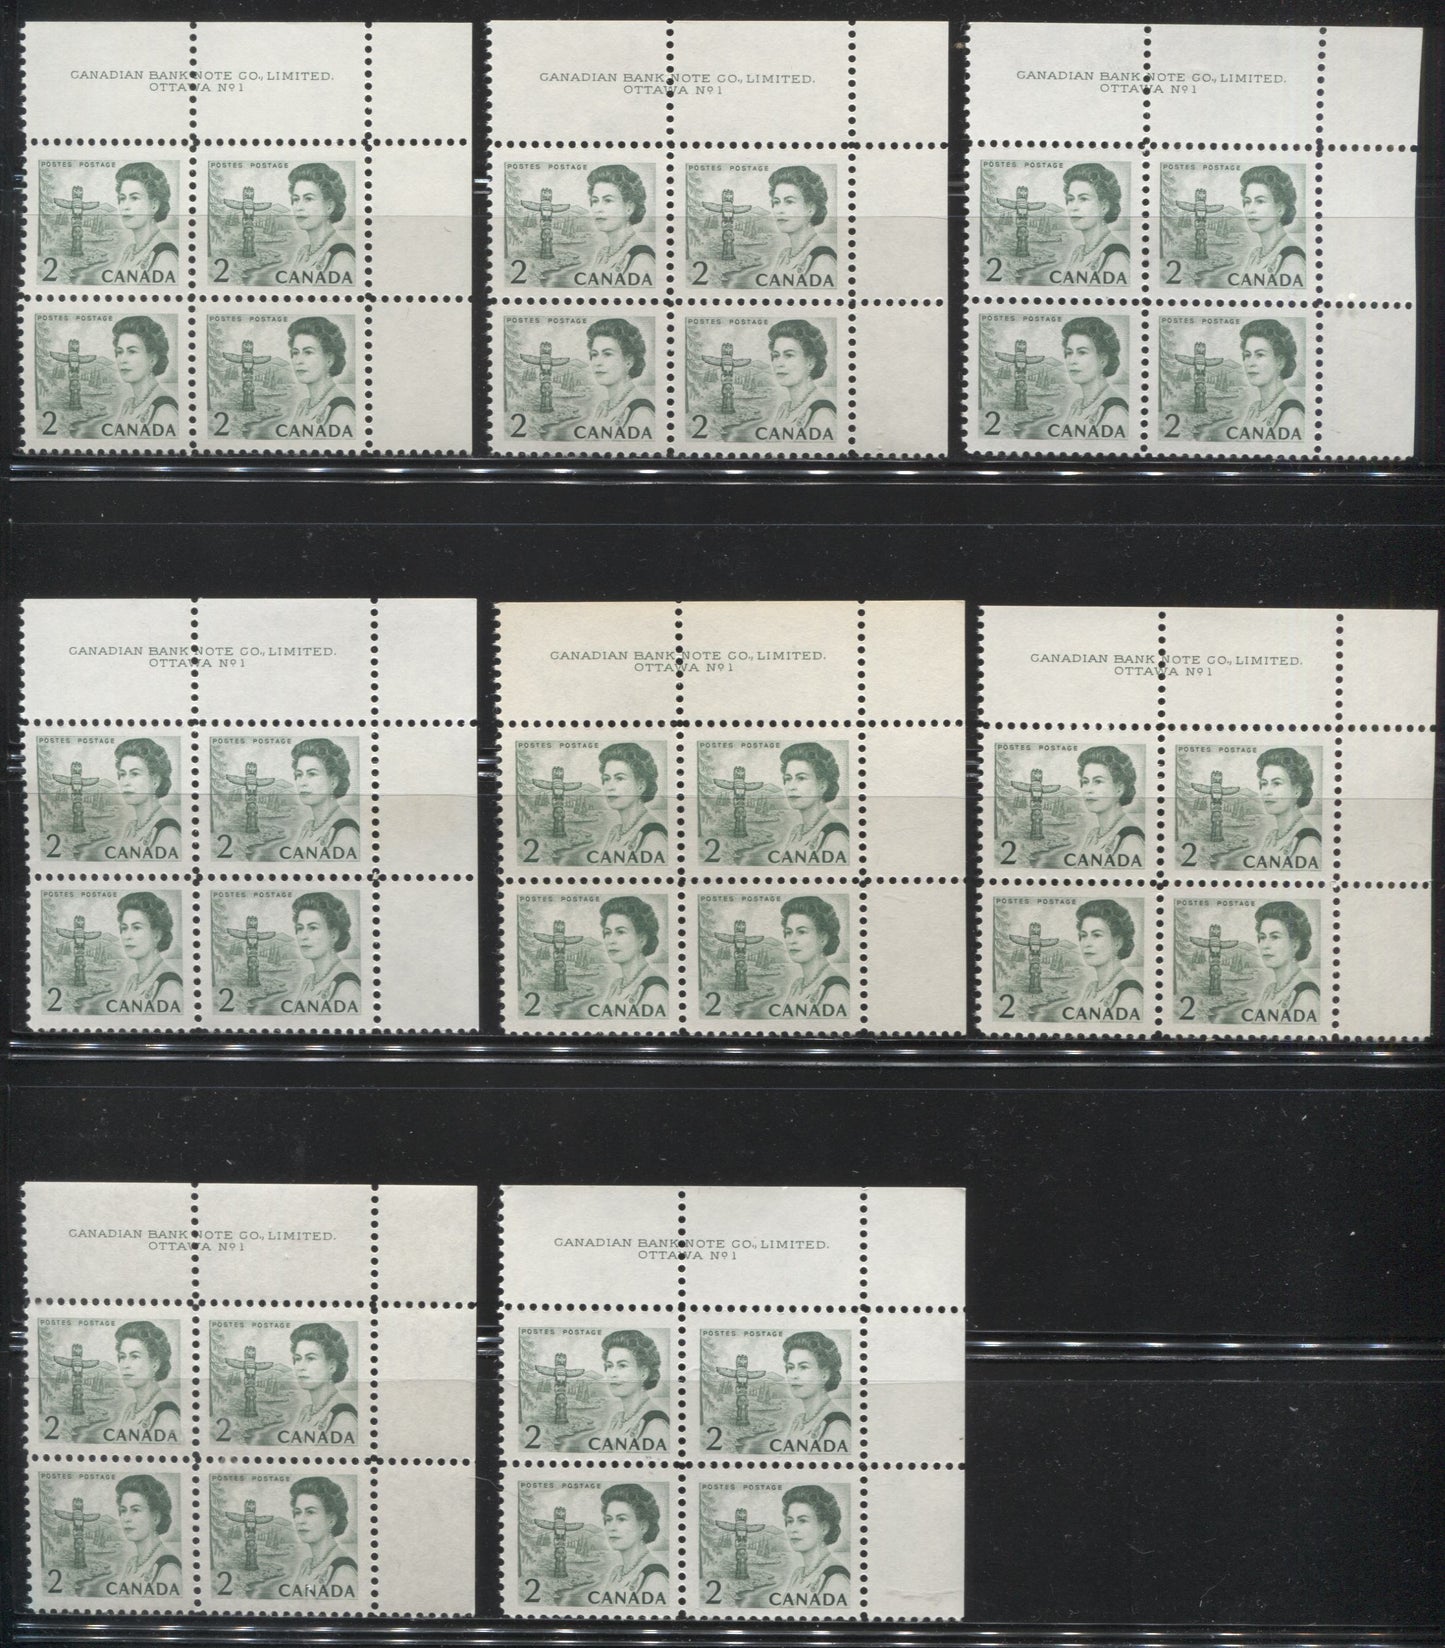 Lot #154 Canada #455, 455iv 2c Green & Deep Bright Green, Pacific Coast Totem Pole, 1967-1973 Centennial Issue, A Specialized Lot of Plate 1 UR Blocks on DF and NF Papers